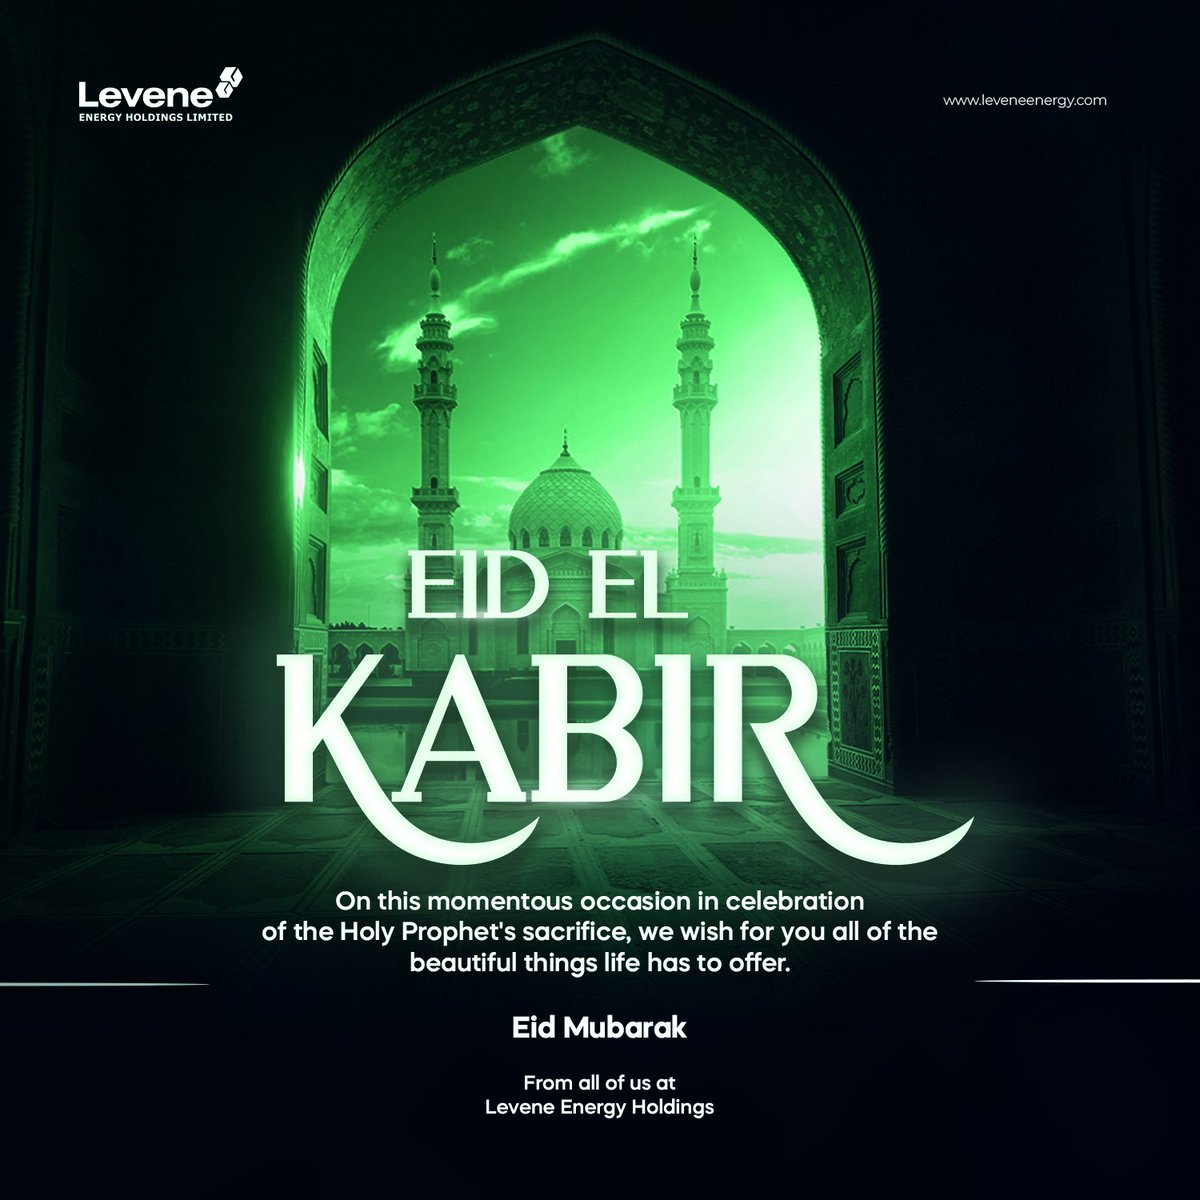 Wishing a blessed #EidElKabir to all who celebrate